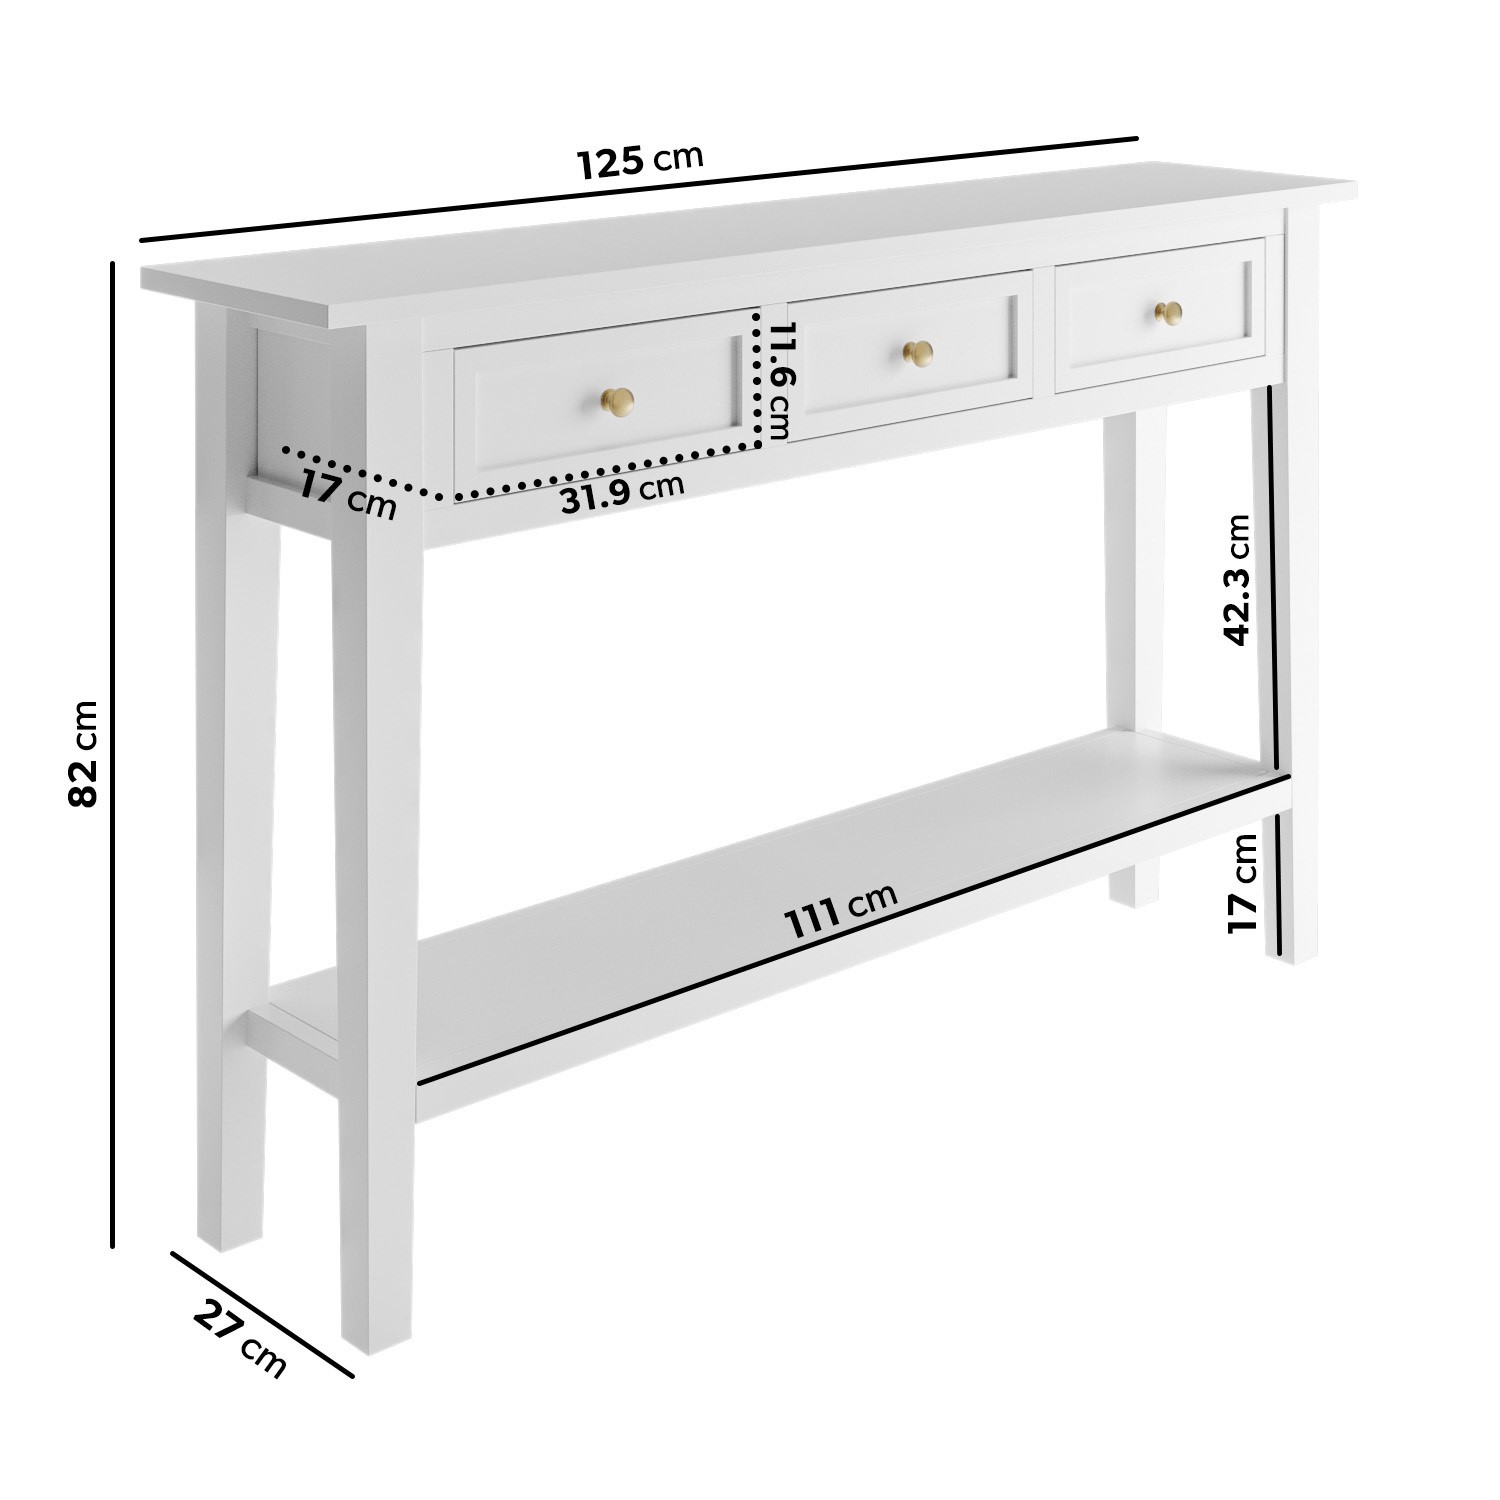 Read more about Narrow white wood console table with drawers elms